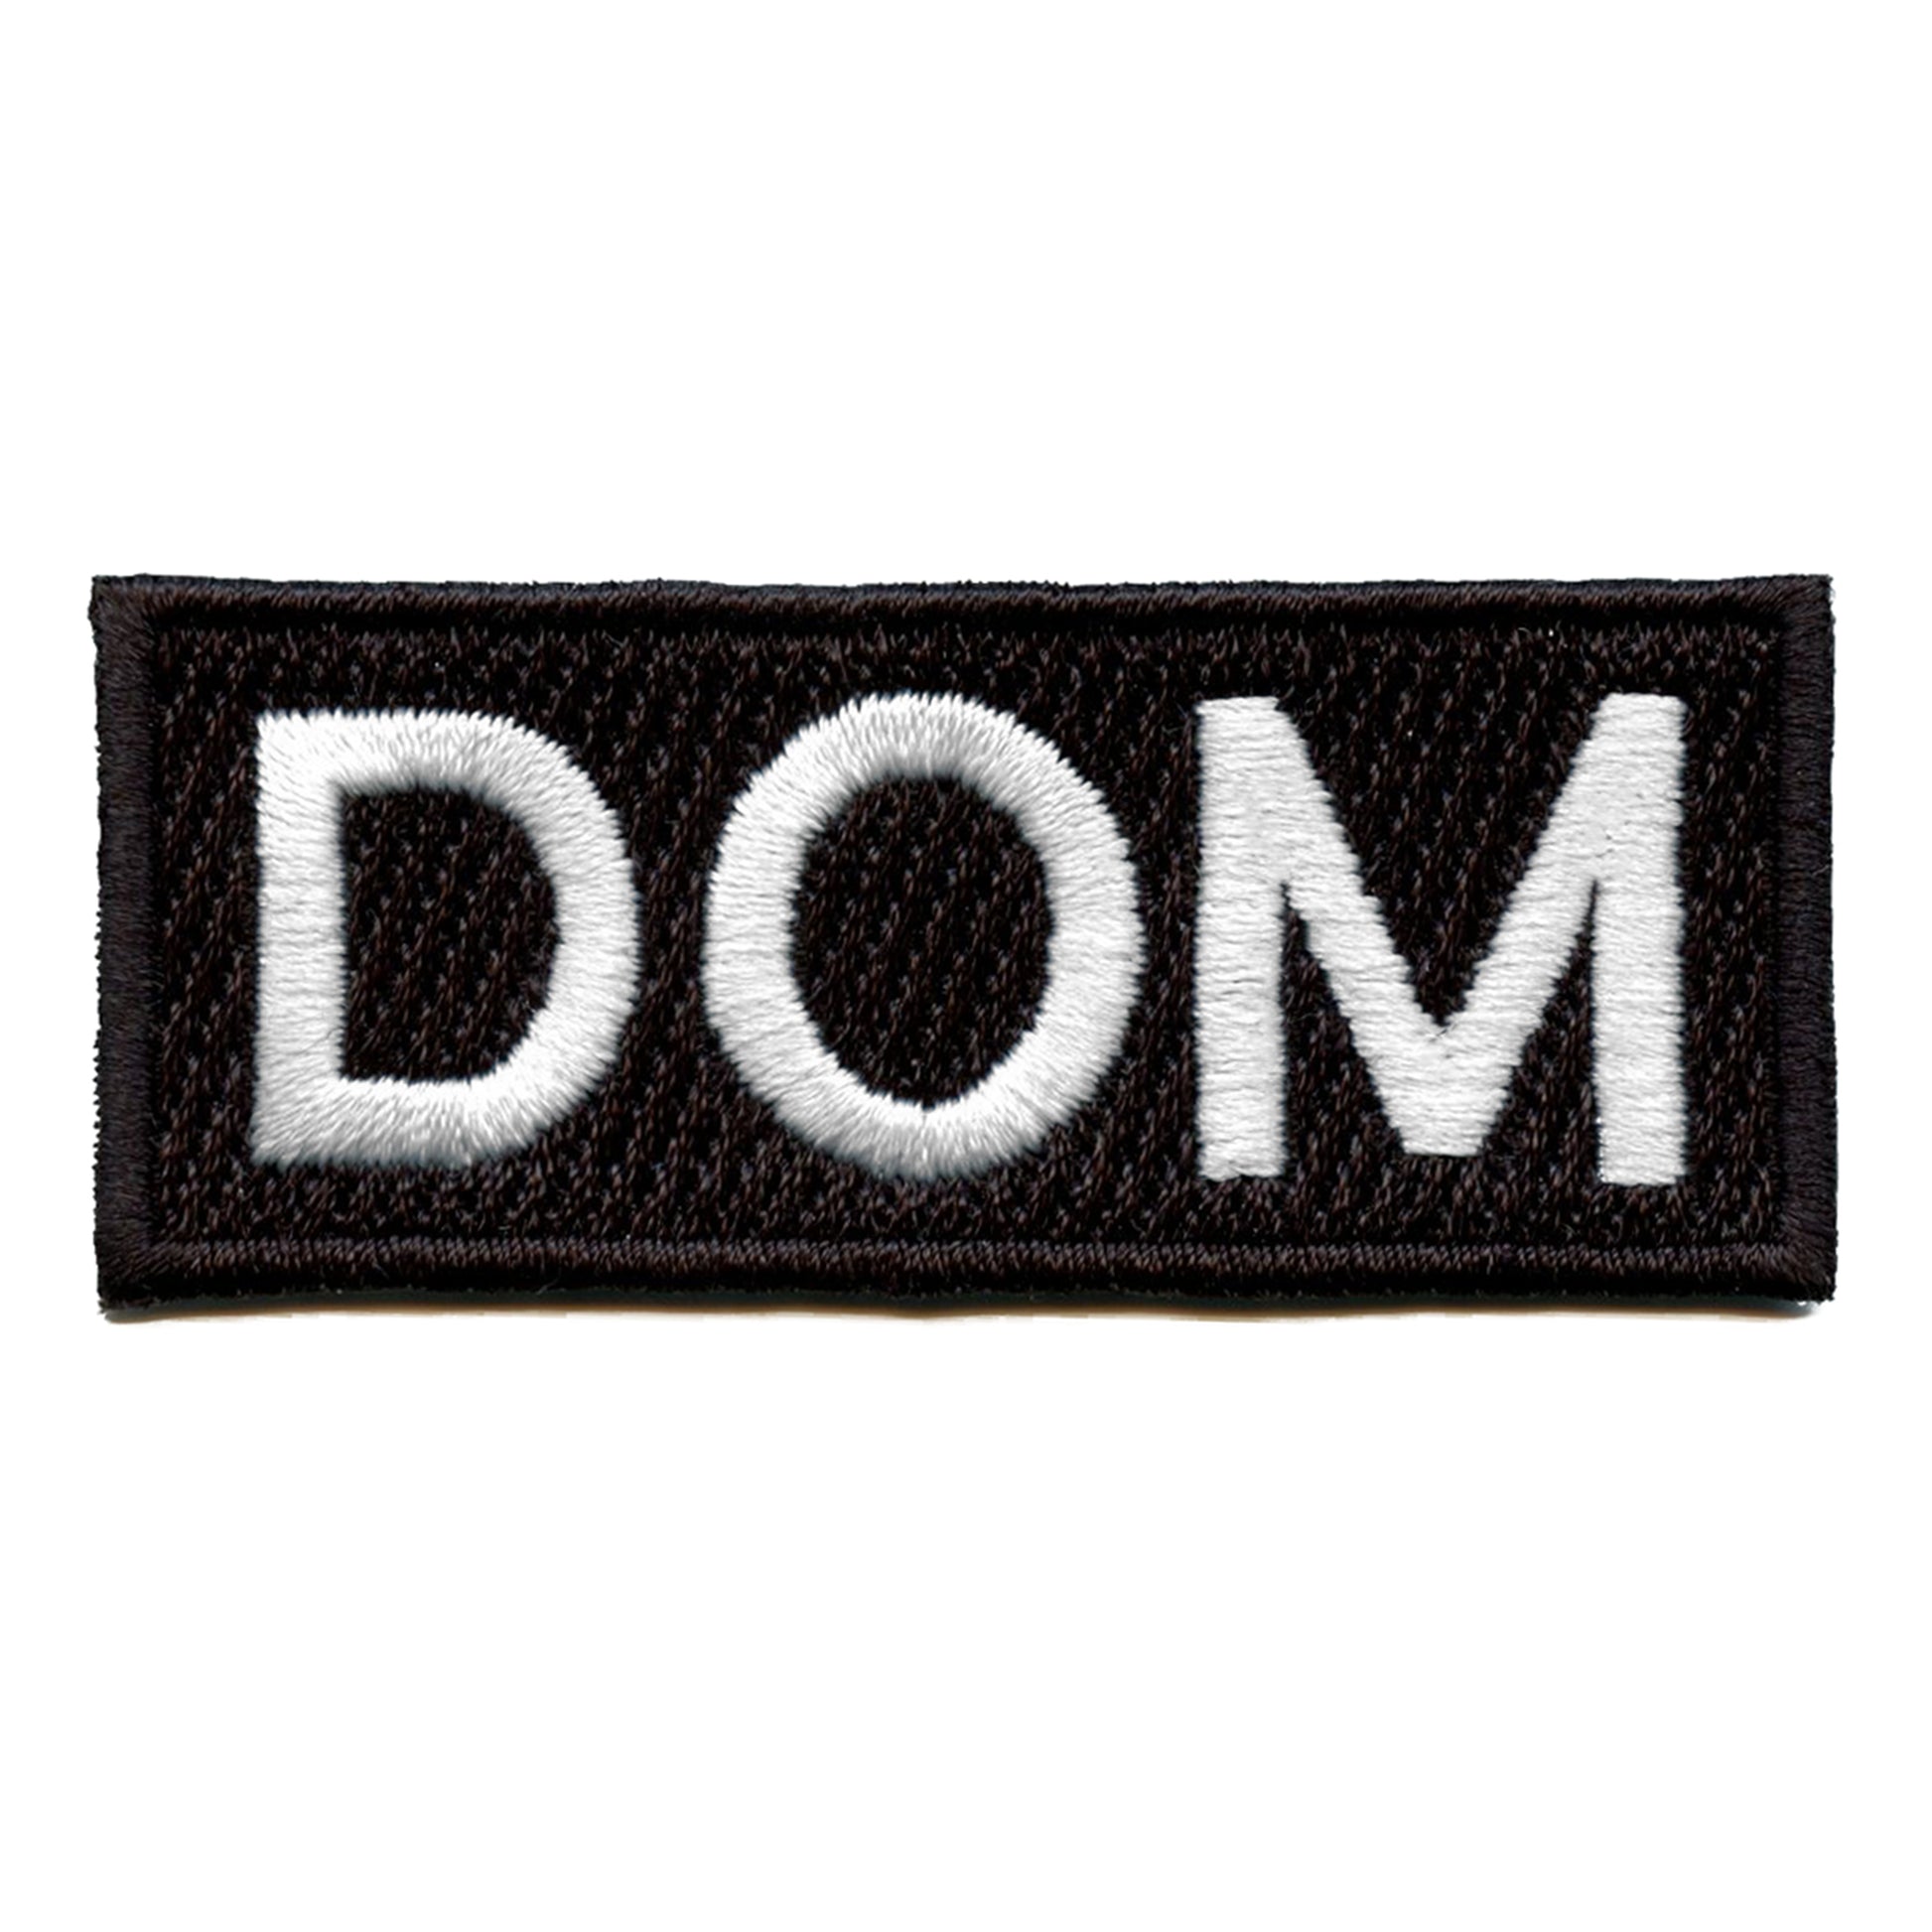 Dom Tag Box Logo Patch Dominant Role Preference Embroidered Iron On 